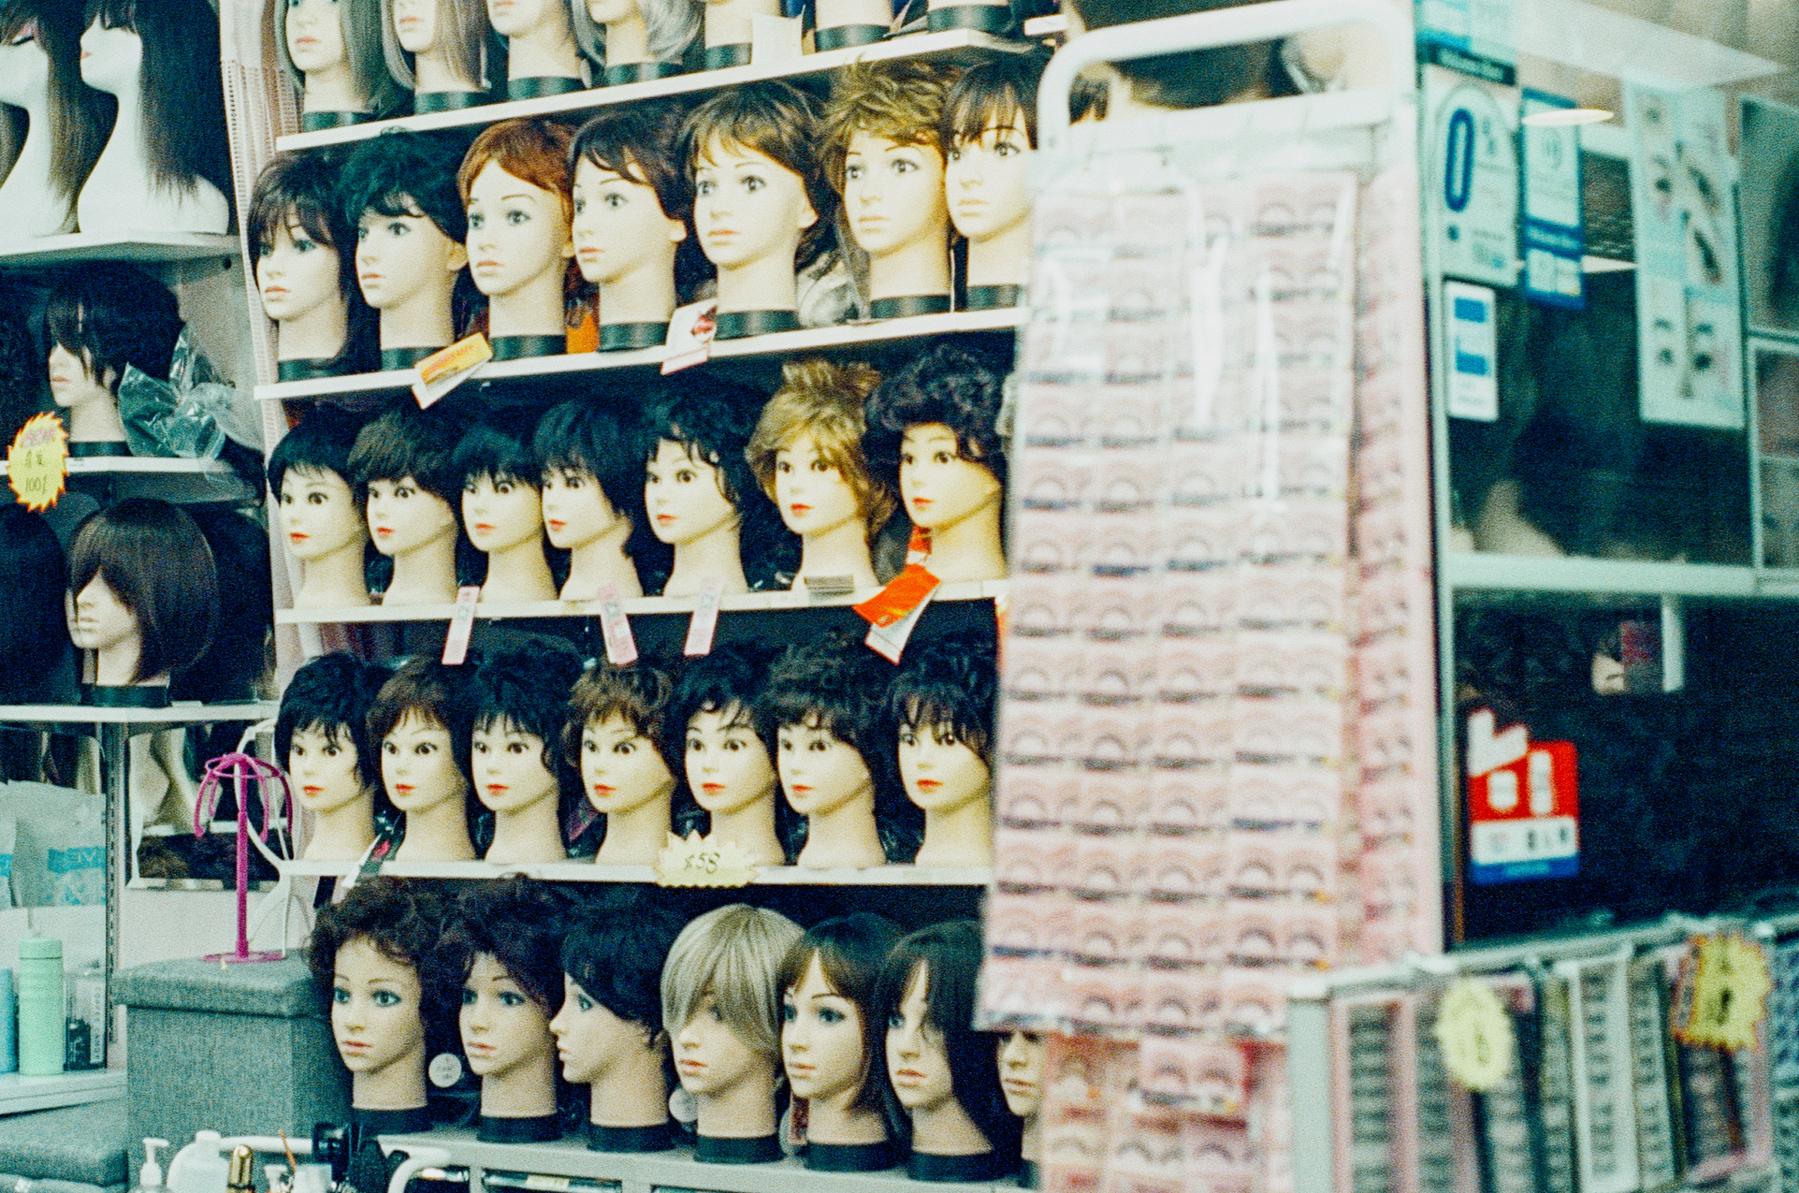 A scan of a color photo of many wigs in a store.